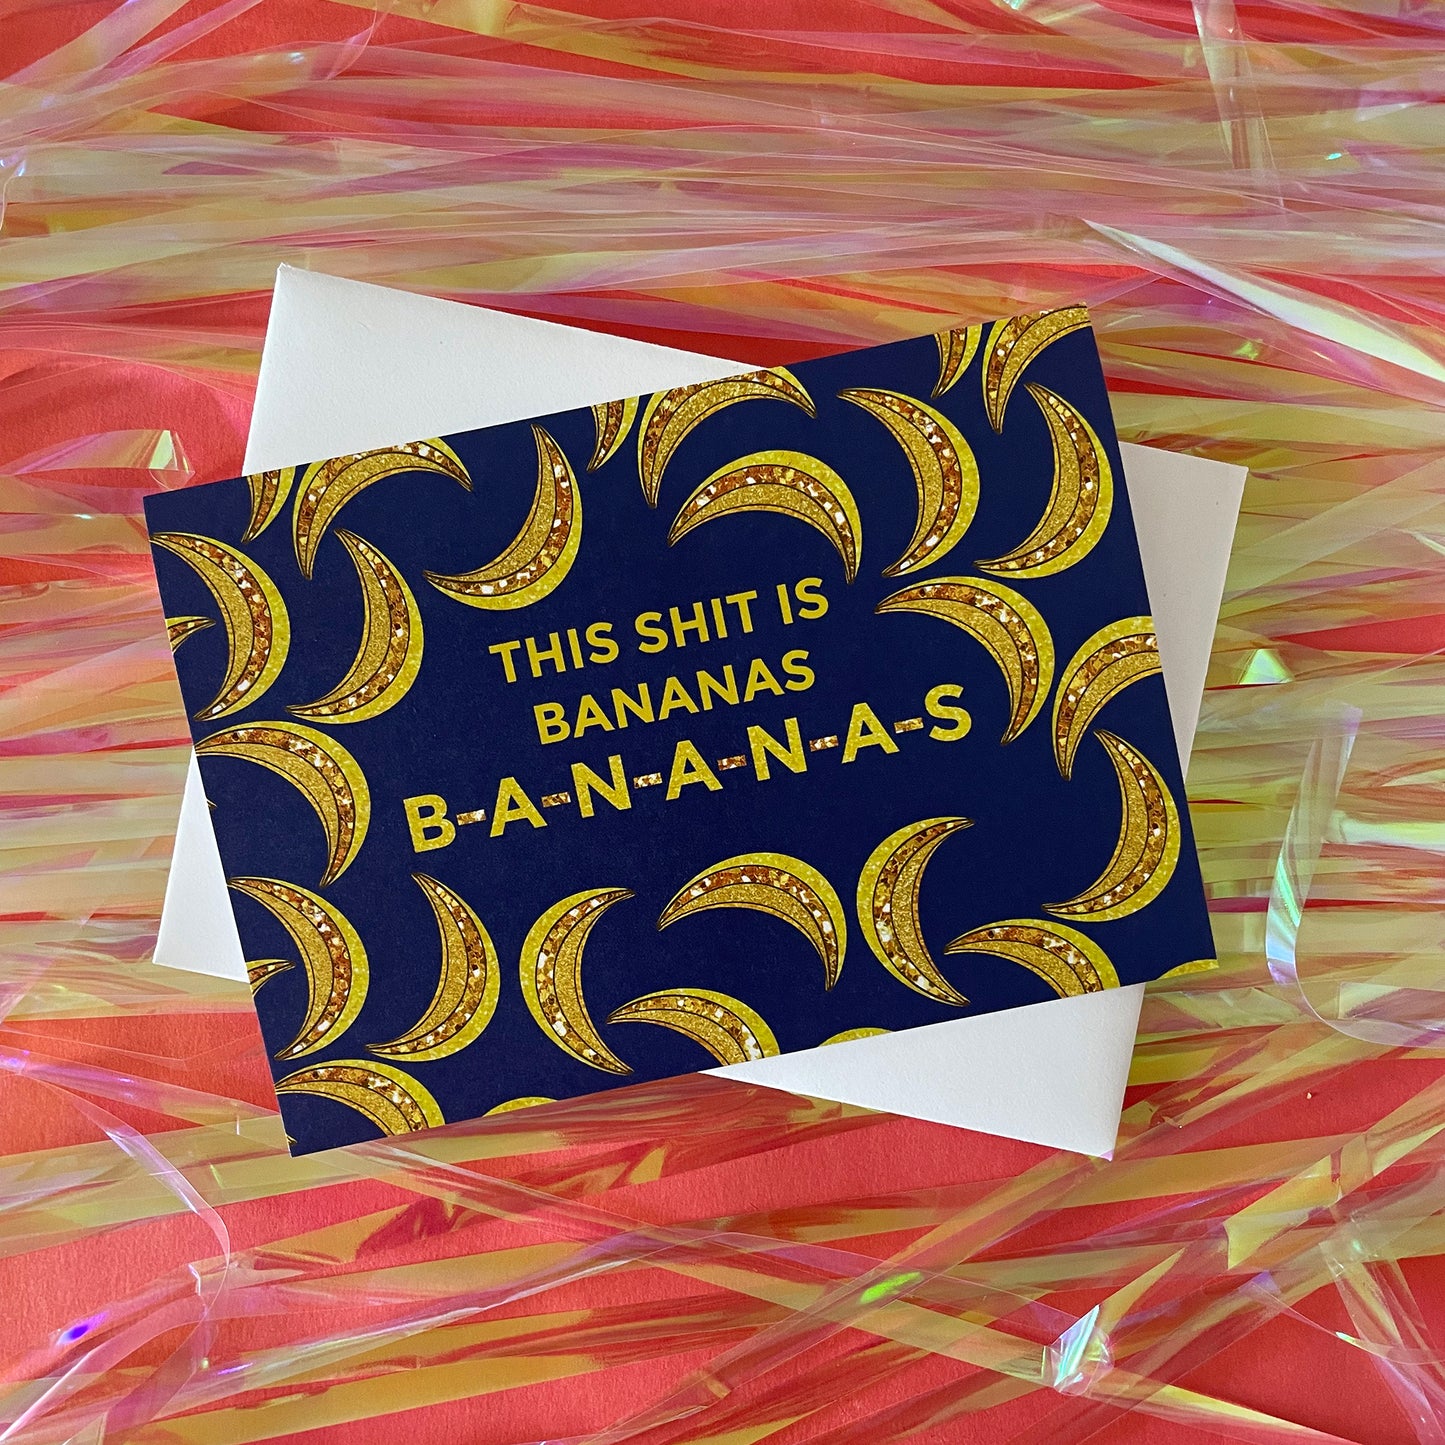 Image of a blue card featuring bejewelled illustrations of bananas and the message 'This Shit is Bananas B-A-N-A-N-A-S.